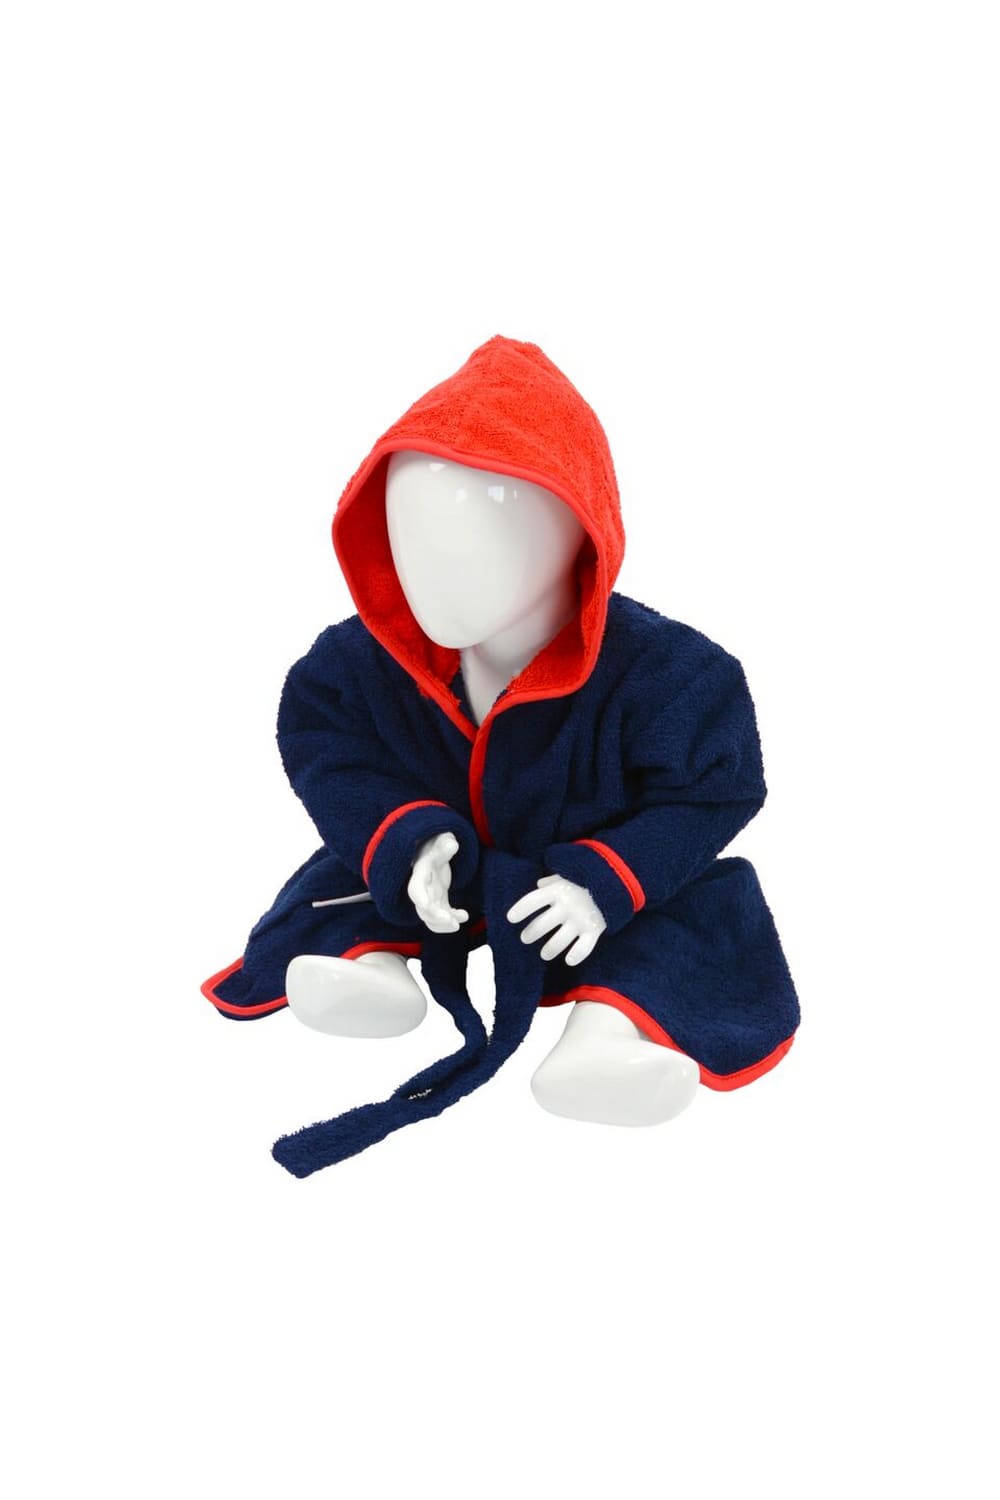 A&R Towels Baby/Toddler Babiezz Hooded Bathrobe (French Navy/Fire Red) (3/12 Months)